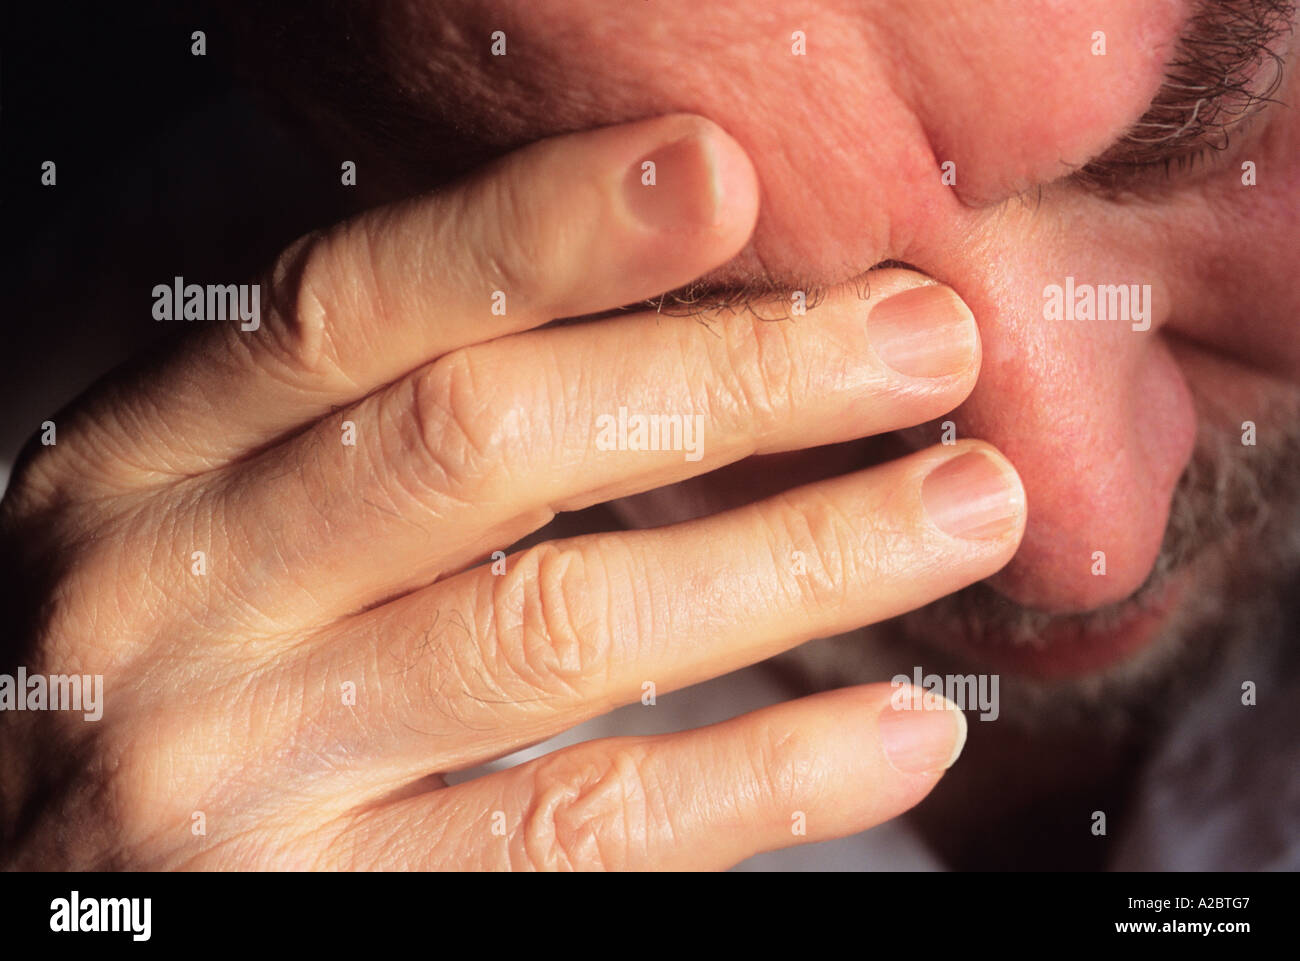 Elderly man under quarantine at home alone during shutdown frowning with hand to brow, frightened at the thought of coronavirus covid virus infection. Stock Photo